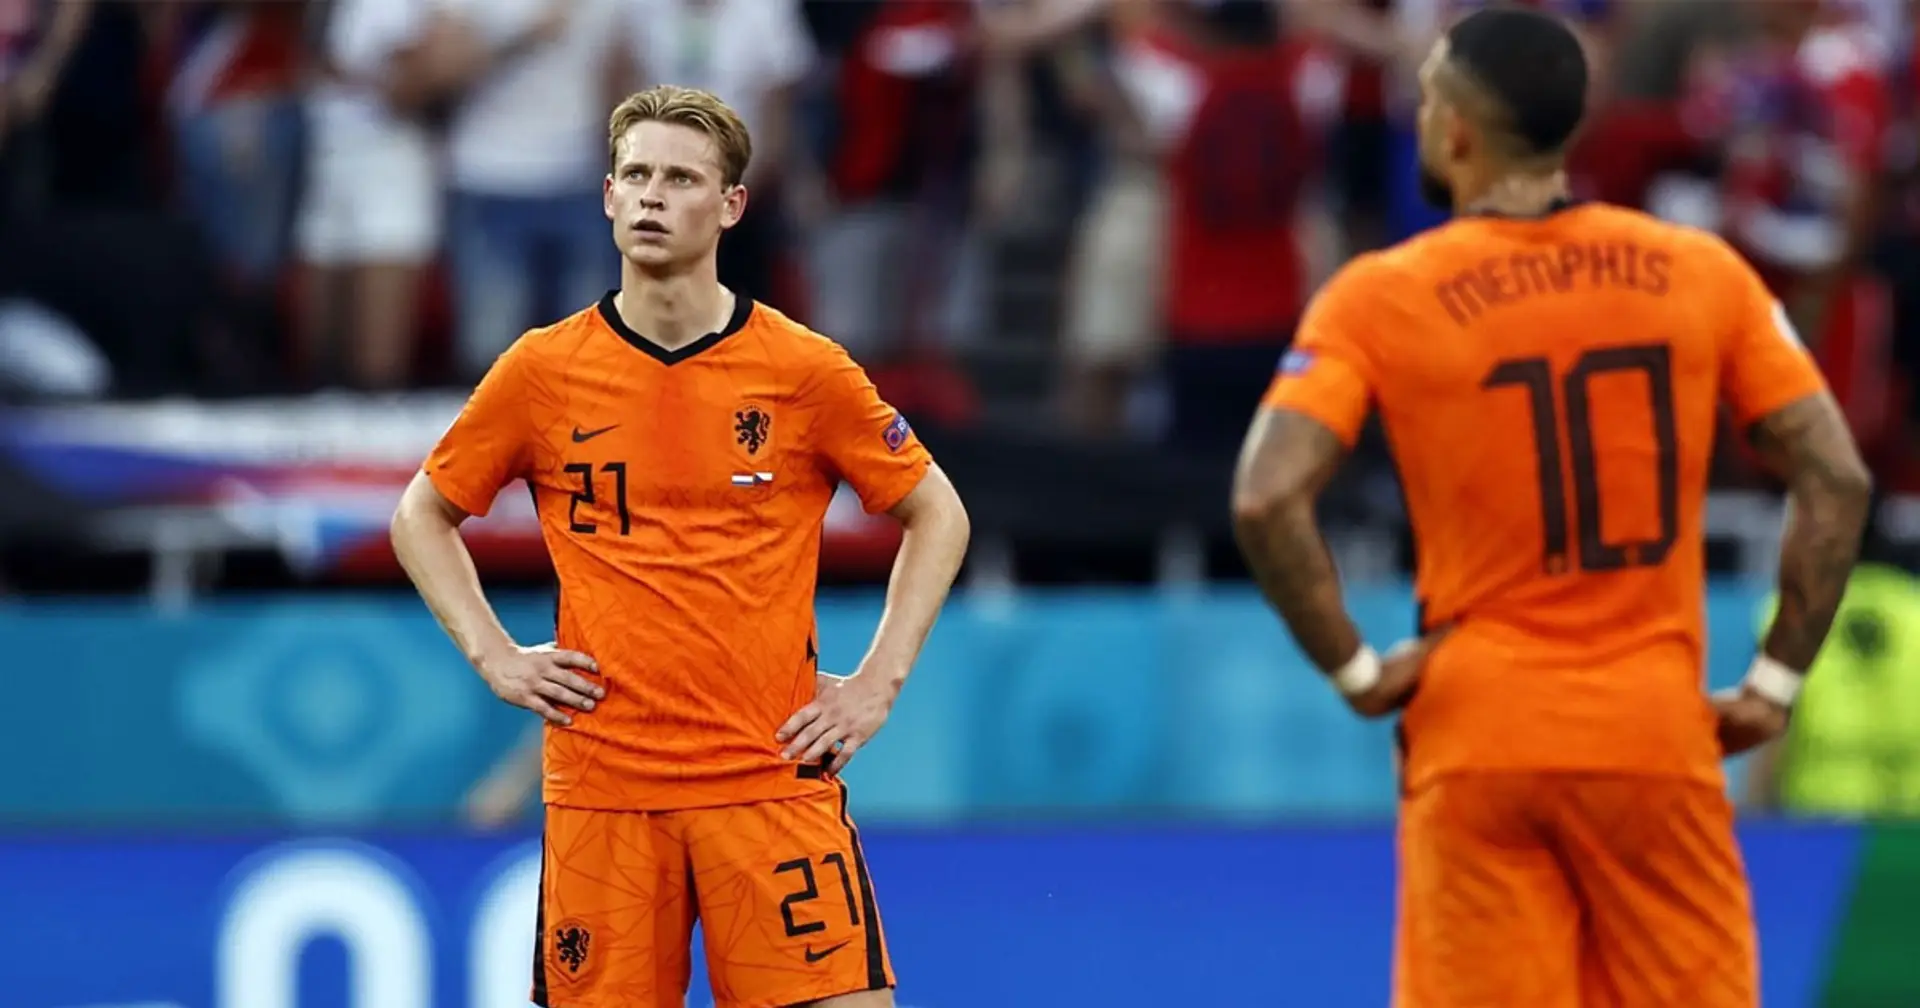 De Jong and Depay become first Barca players eliminated from Euros